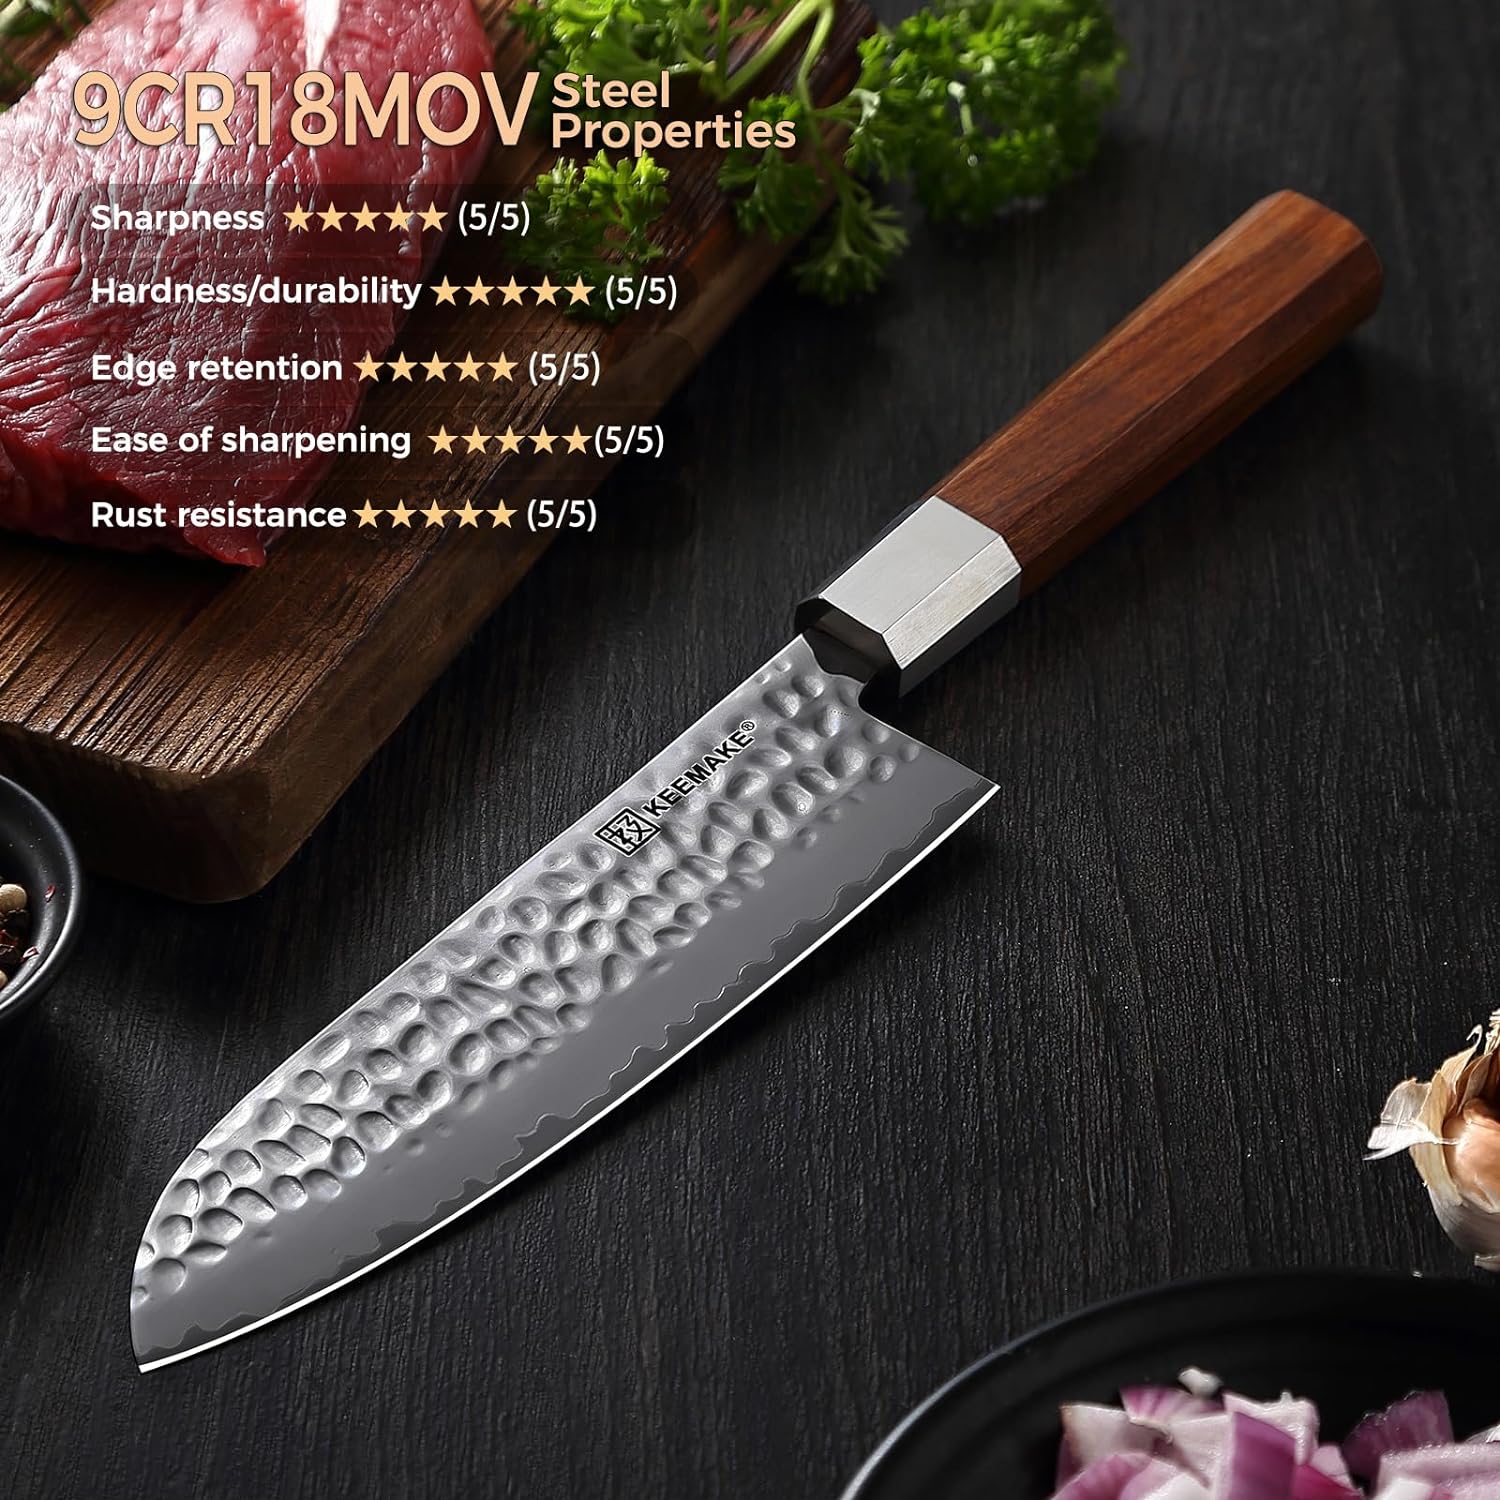 KEEMAKE Kitchen Knife Set of 4pcs, Chef Knife Set with 3-layer Japanese 9CR19MOV Clad Steel Blade